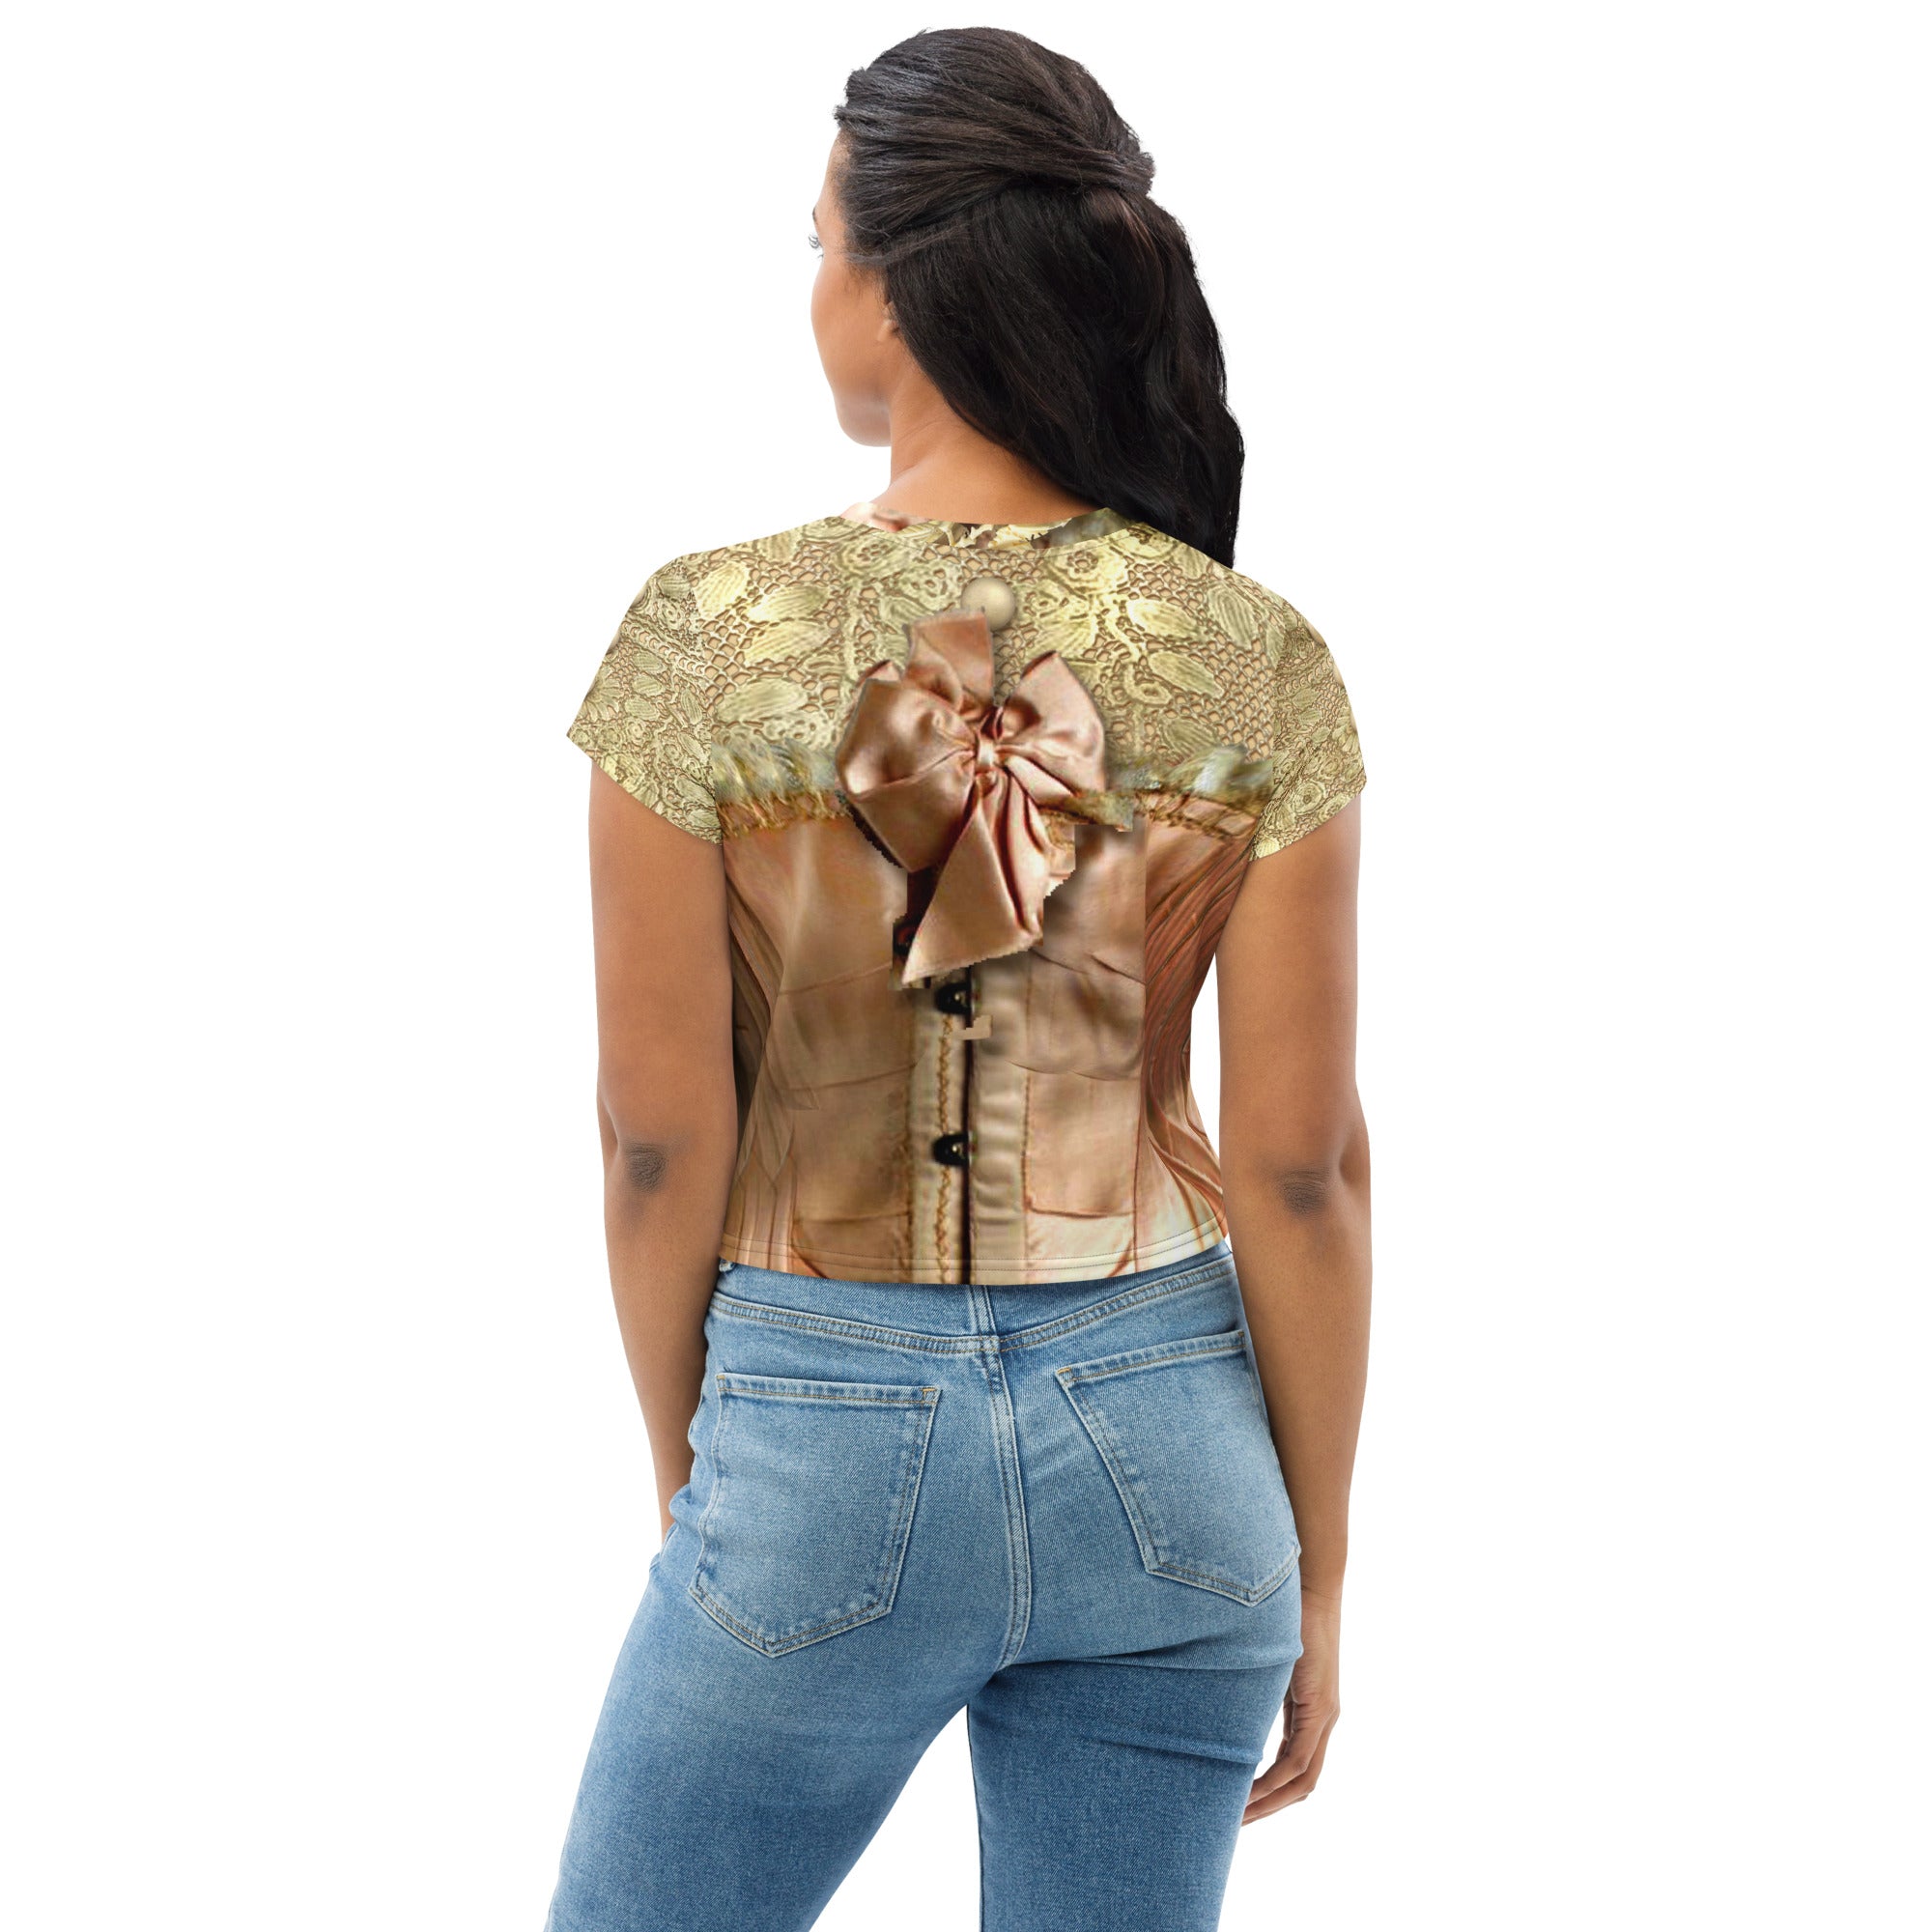 THE "ROSE CAMISOLE CROP TOP" for women